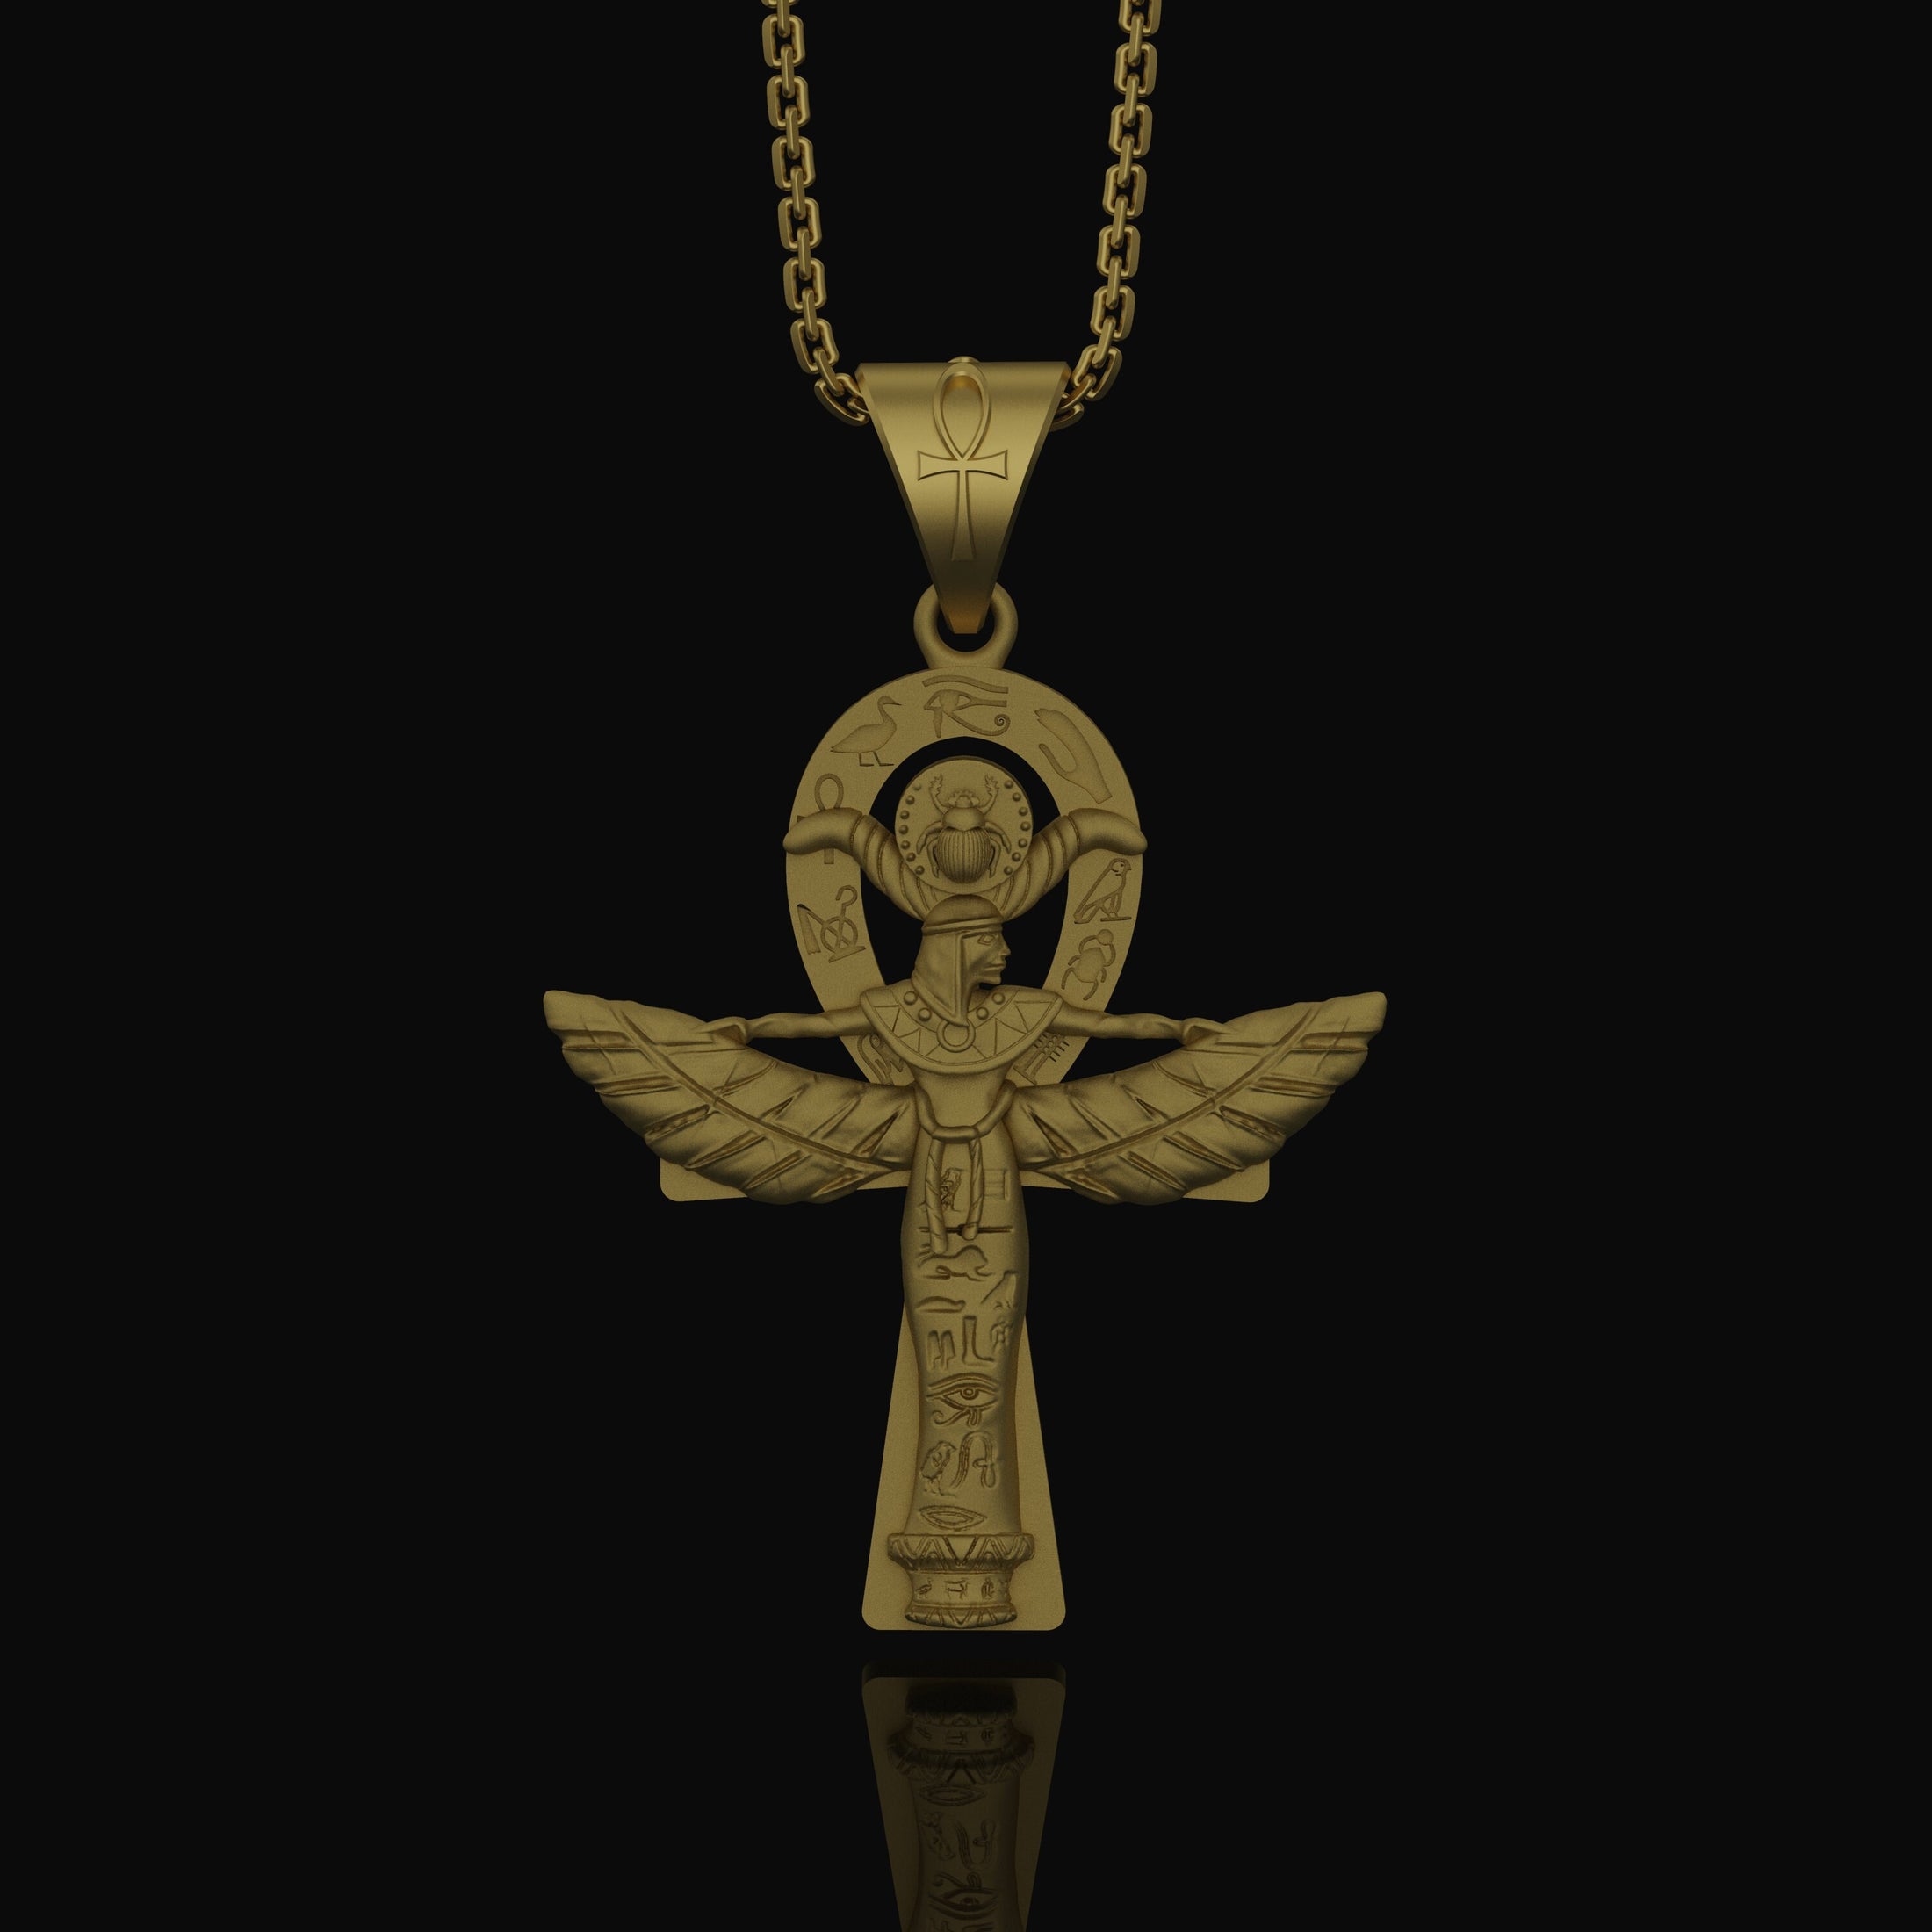 Silver Isis Necklace, Egyptian Goddess Charm, Hieroglyphic Ankh Pendant, Symbol of Life & Magic, Ancient Egypt Jewelry Gold Matte